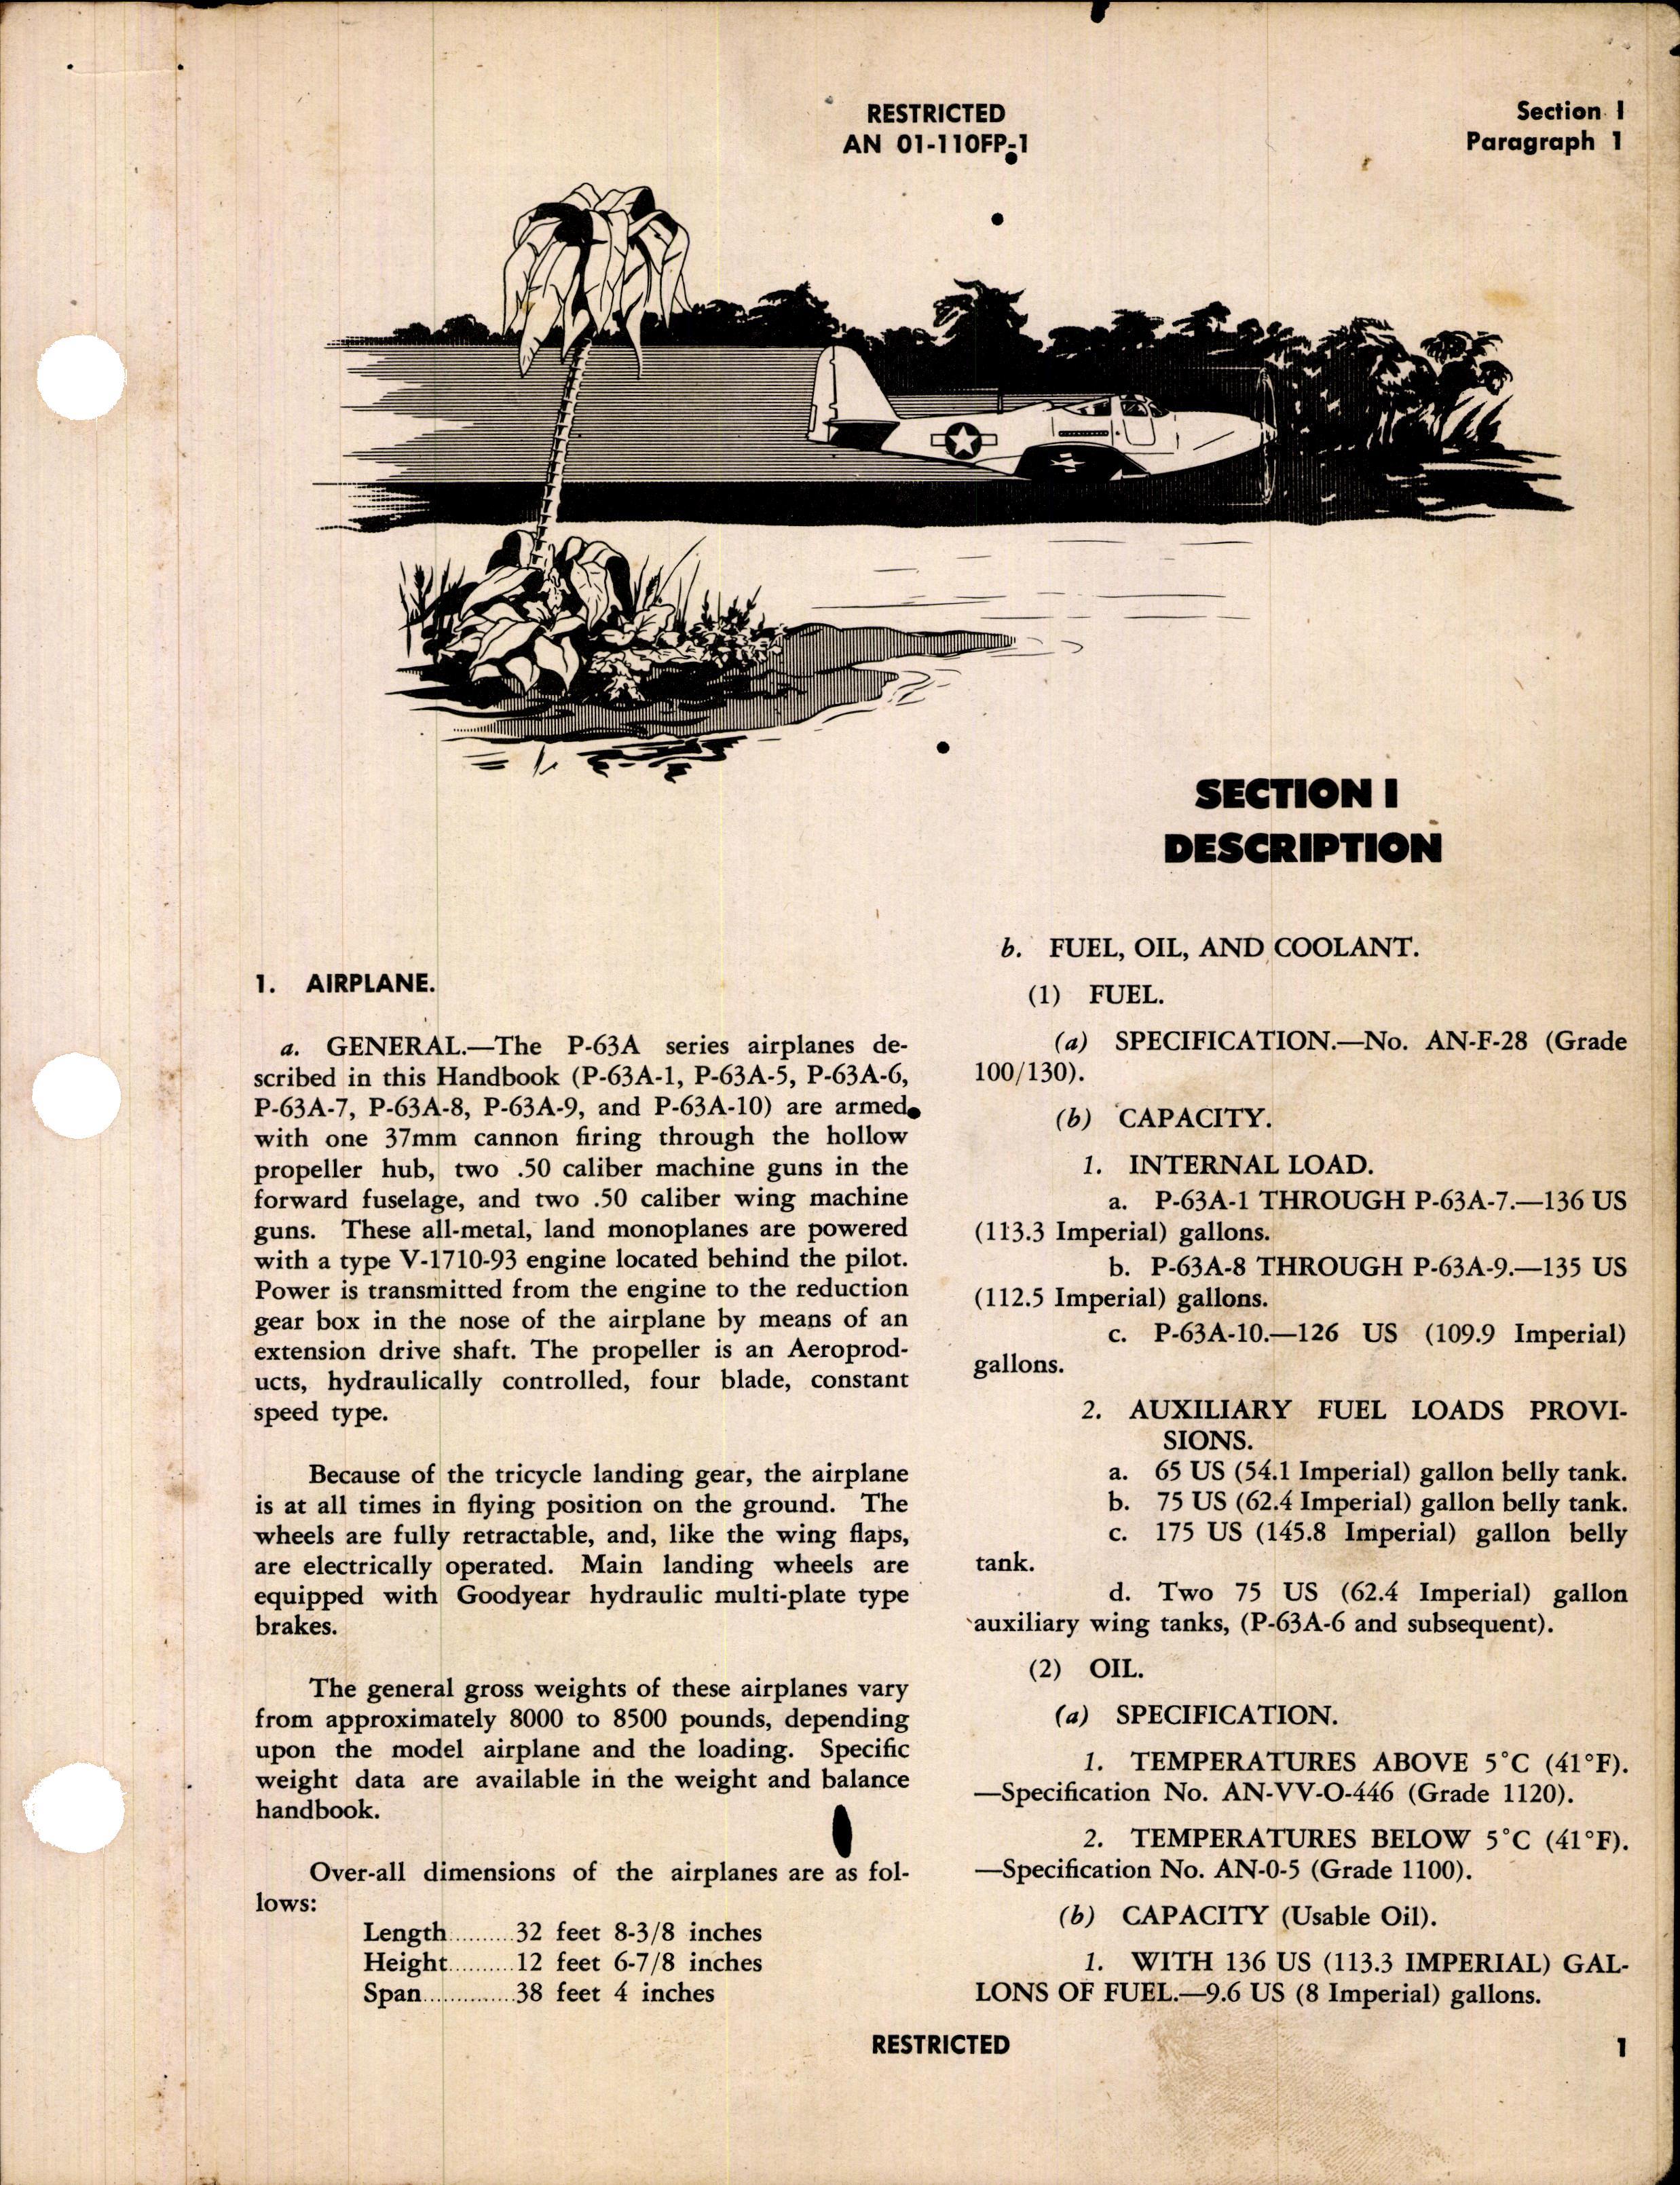 Sample page 5 from AirCorps Library document: Pilot's Handbook for RP-63G-1